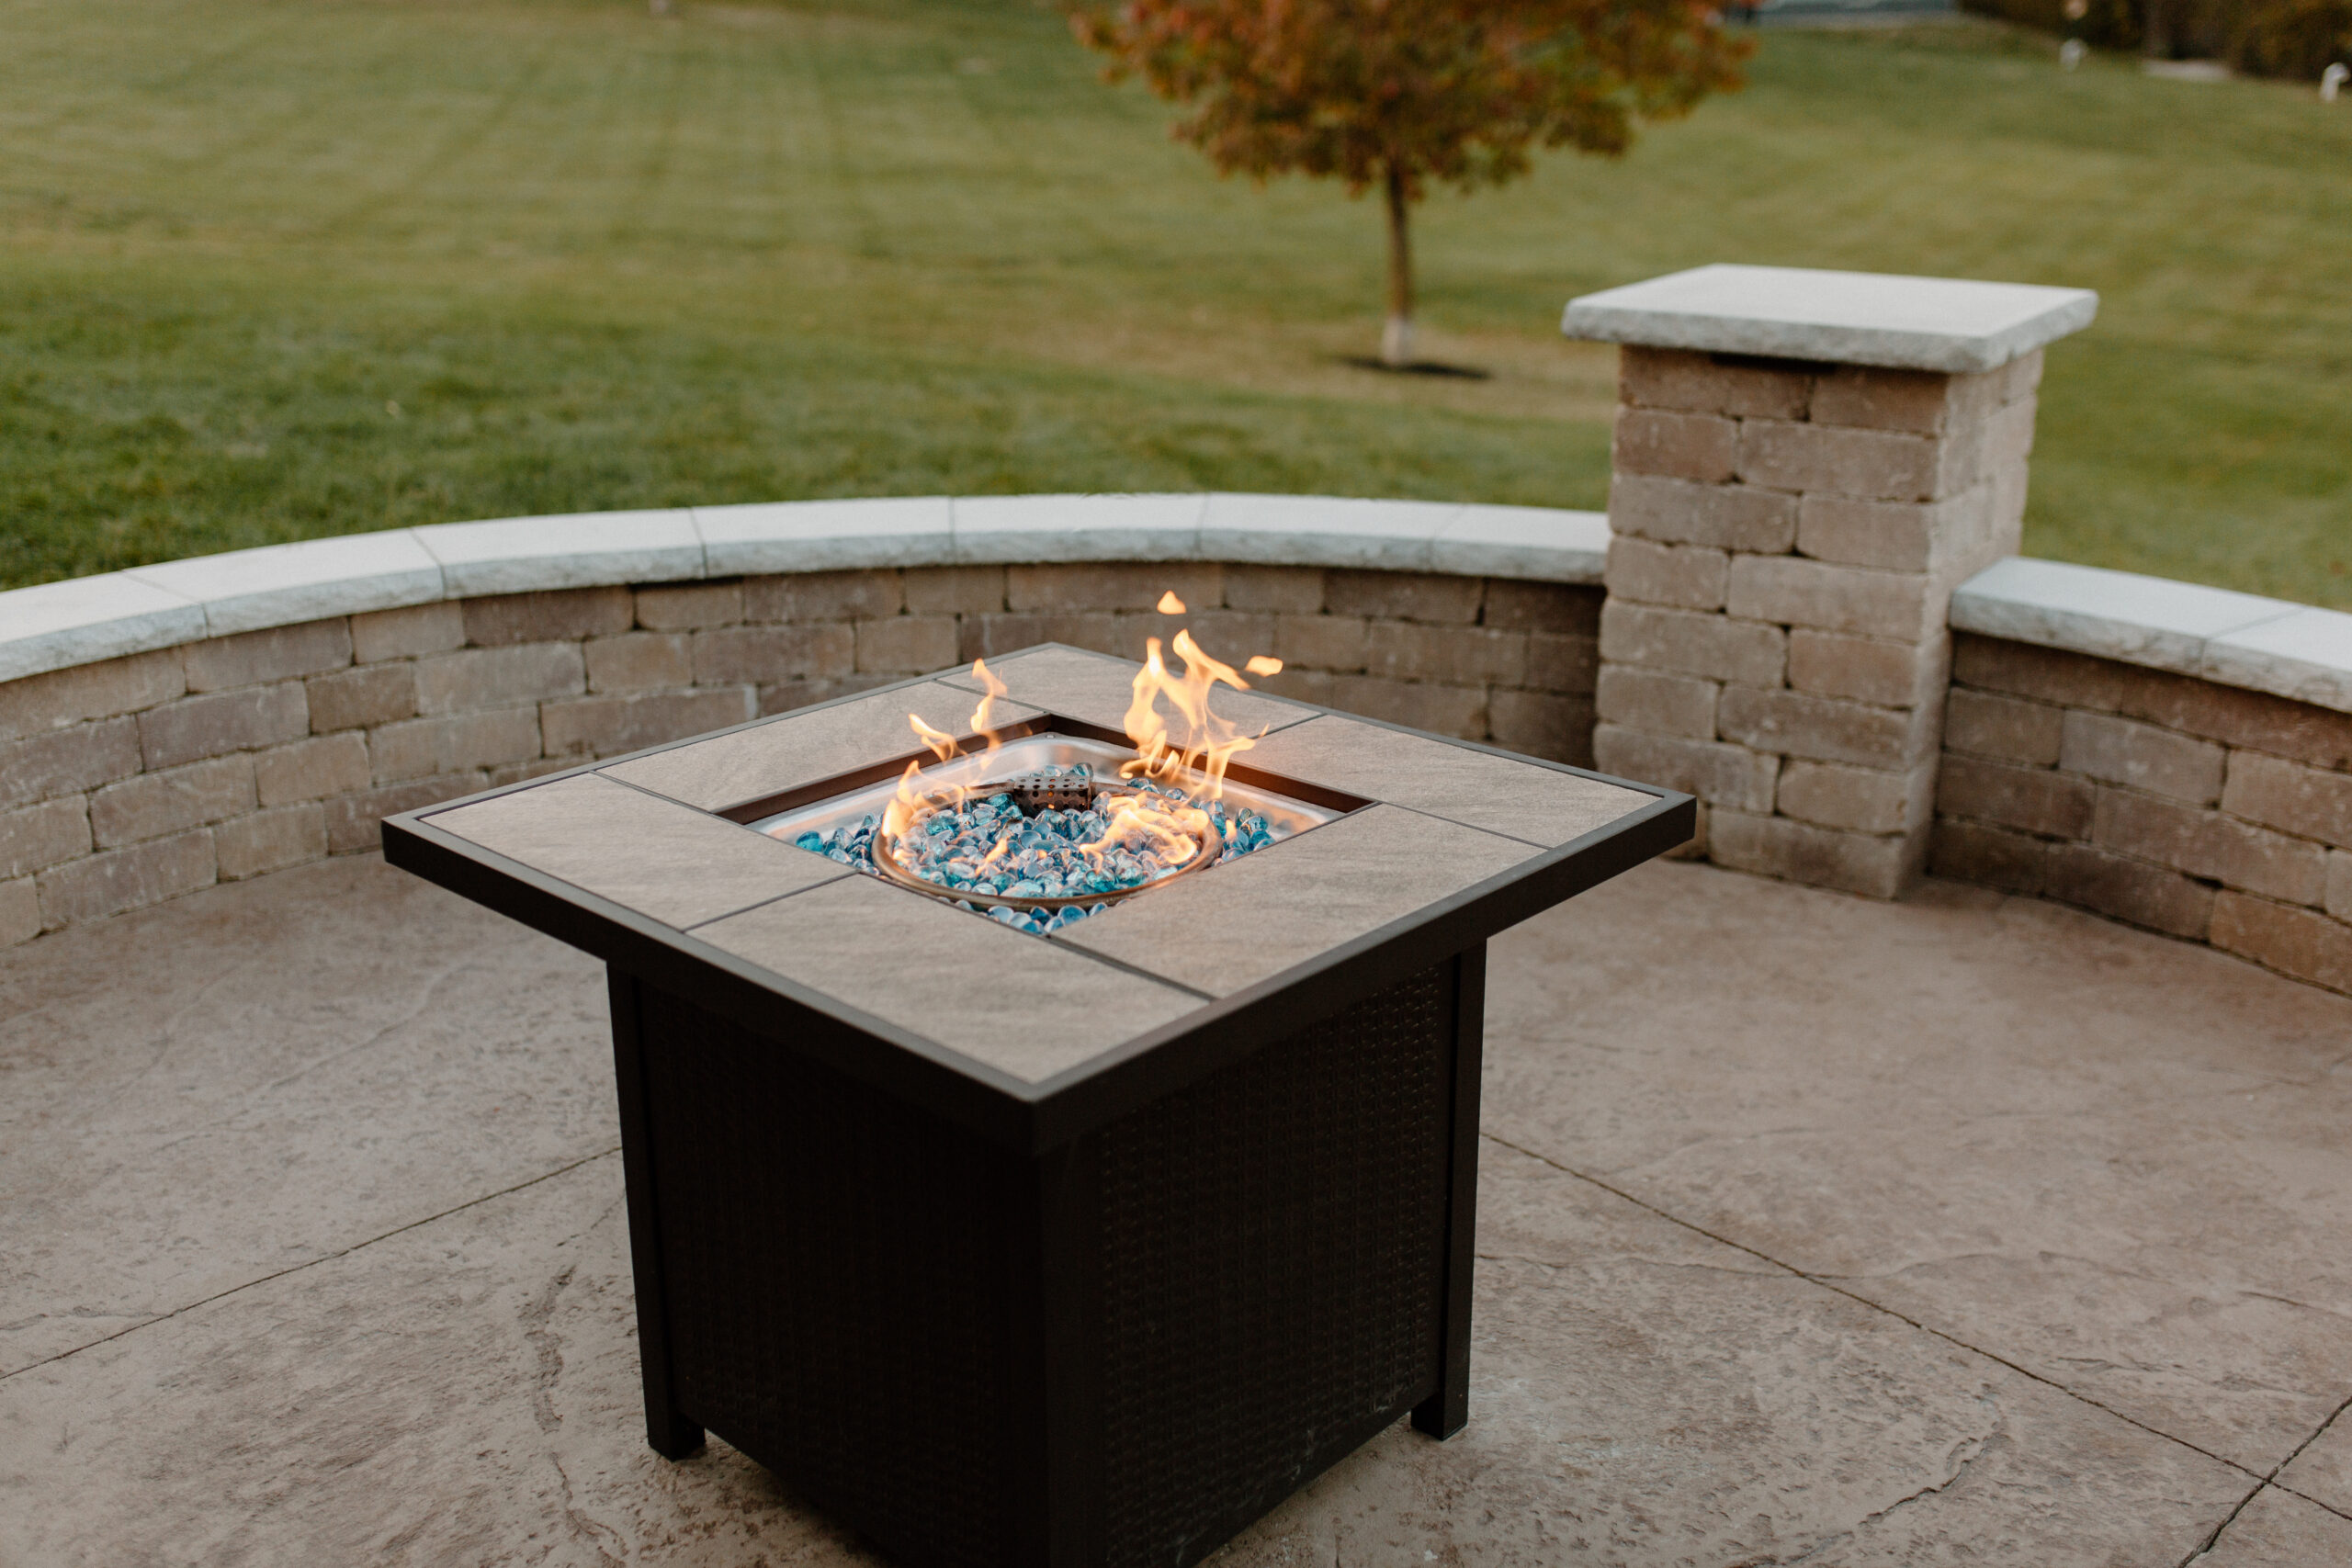 fire going in a fire pit on a patio with a stone seating surround - Creative Nature Iowa